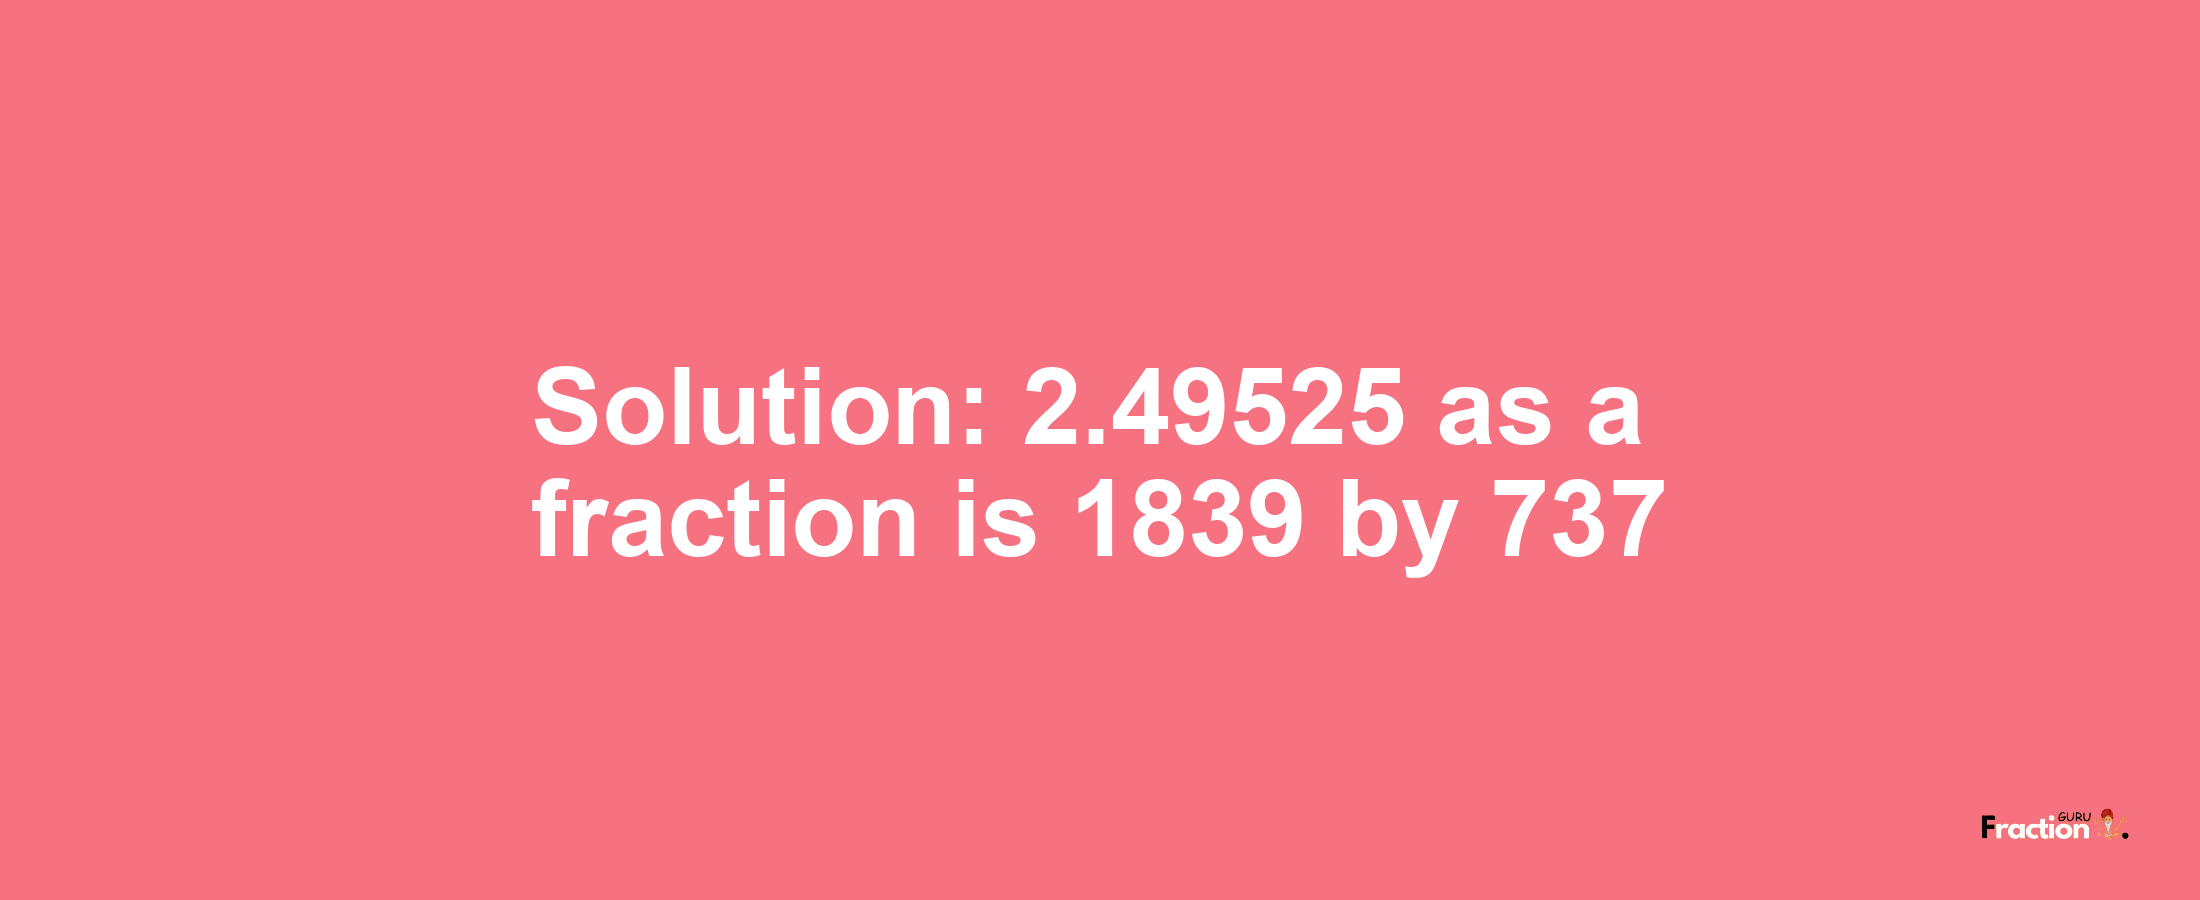 Solution:2.49525 as a fraction is 1839/737